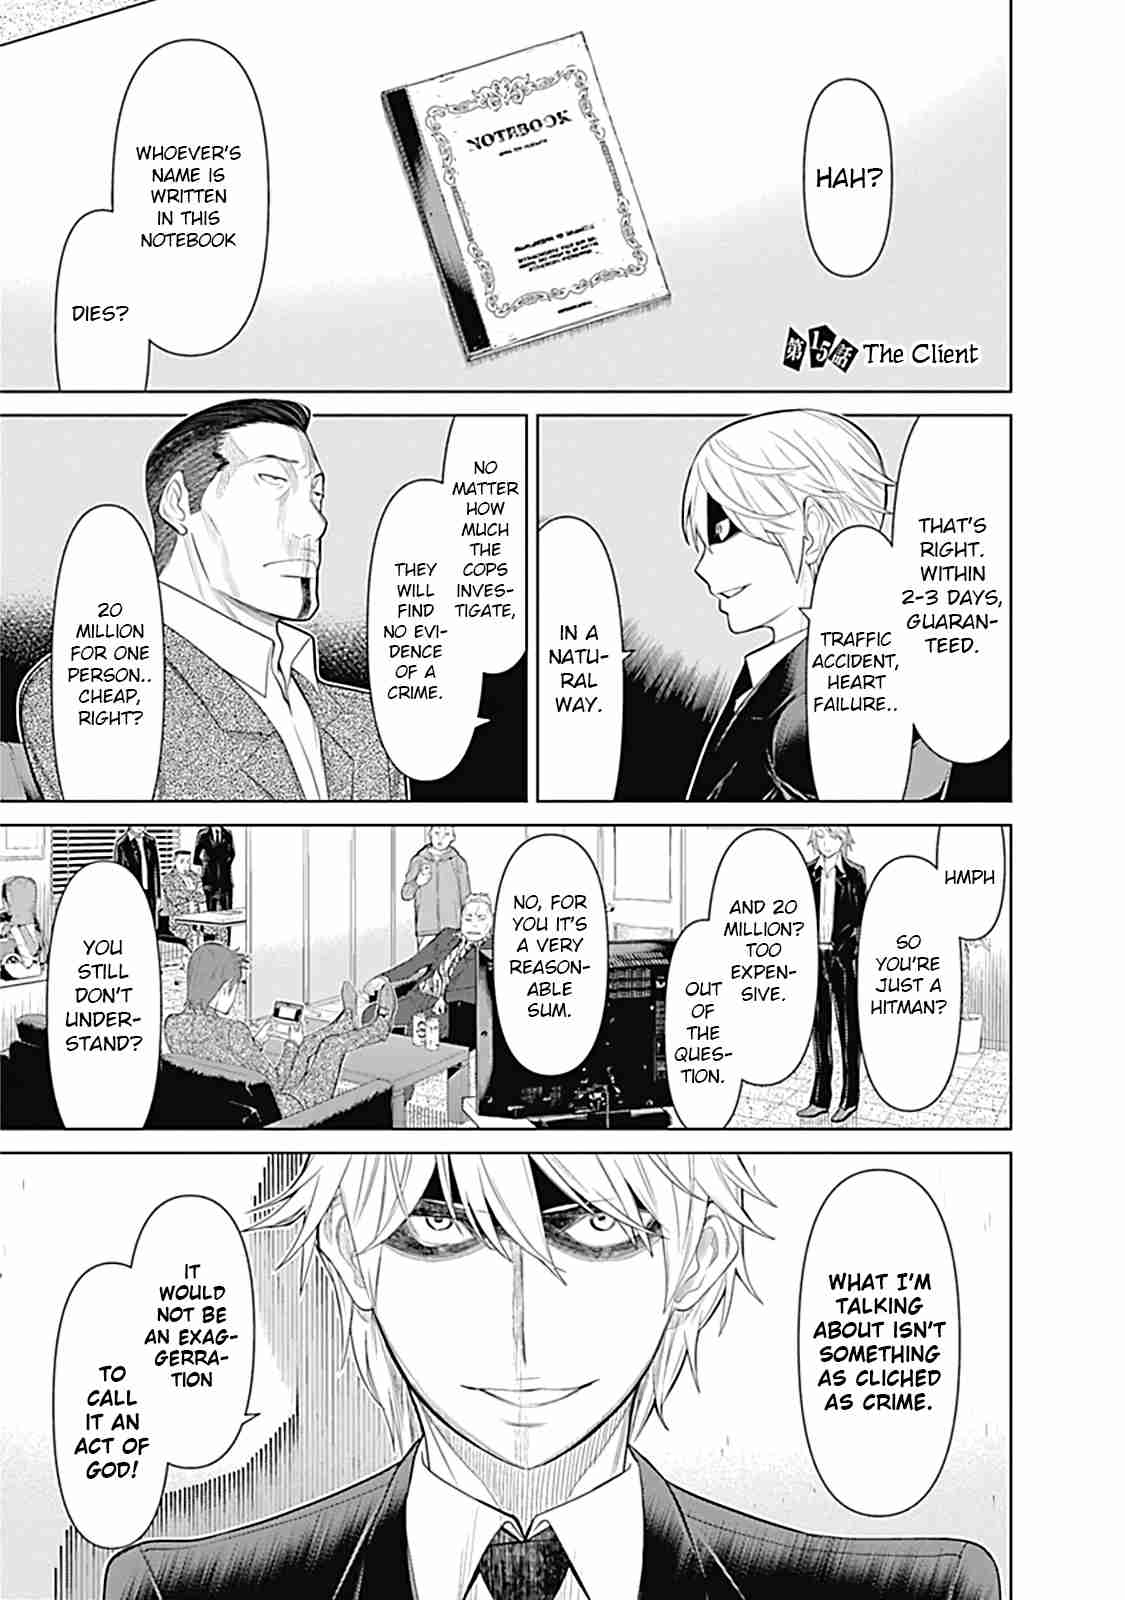 Kako And The False Detective Vol. 2 Ch. 15 The Client